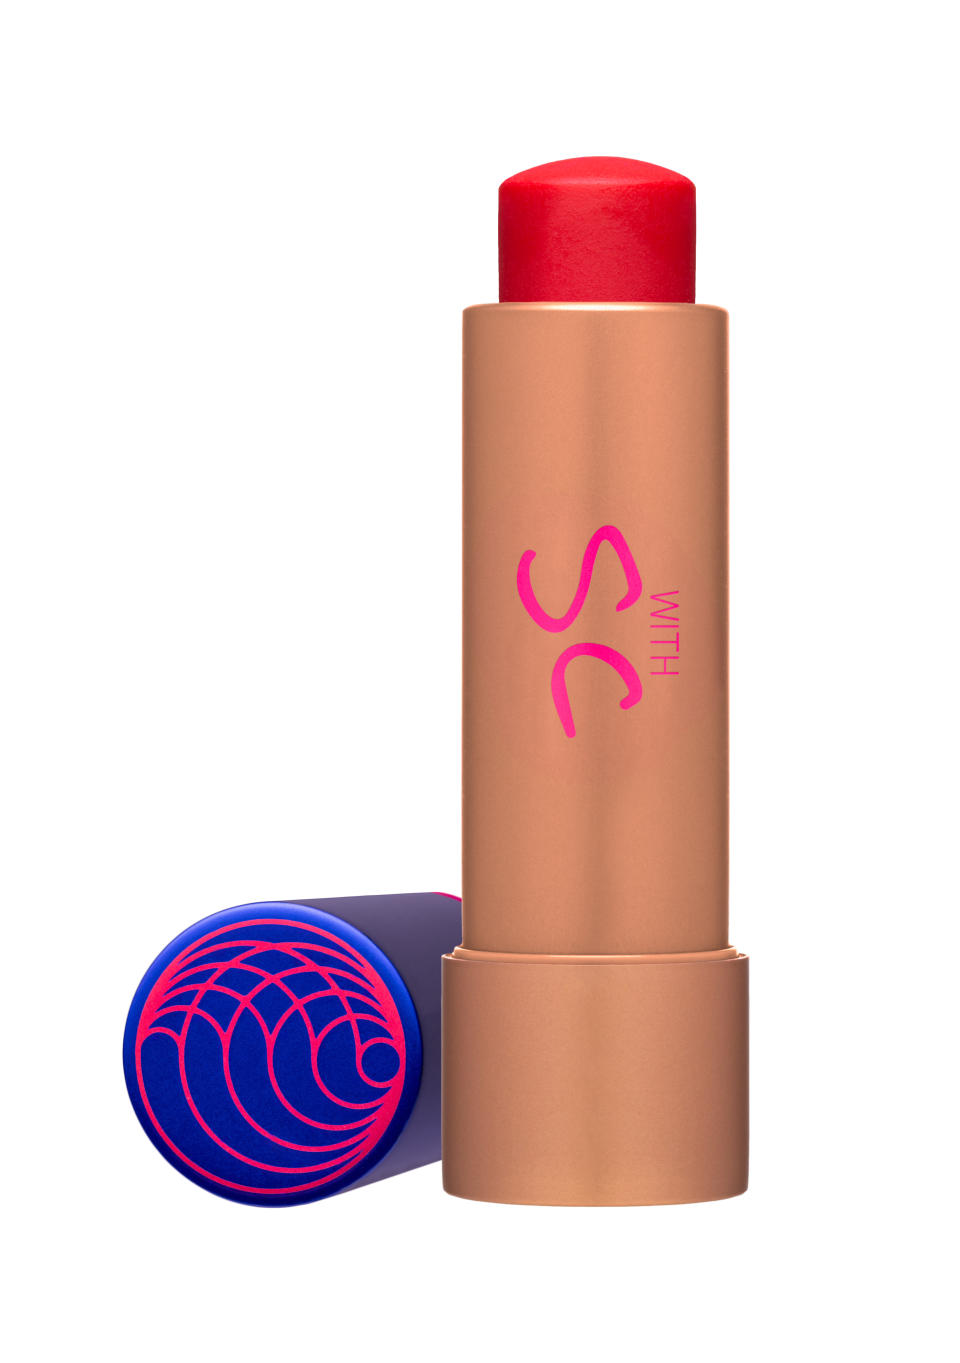 The Tinted Balm in Shade 2.